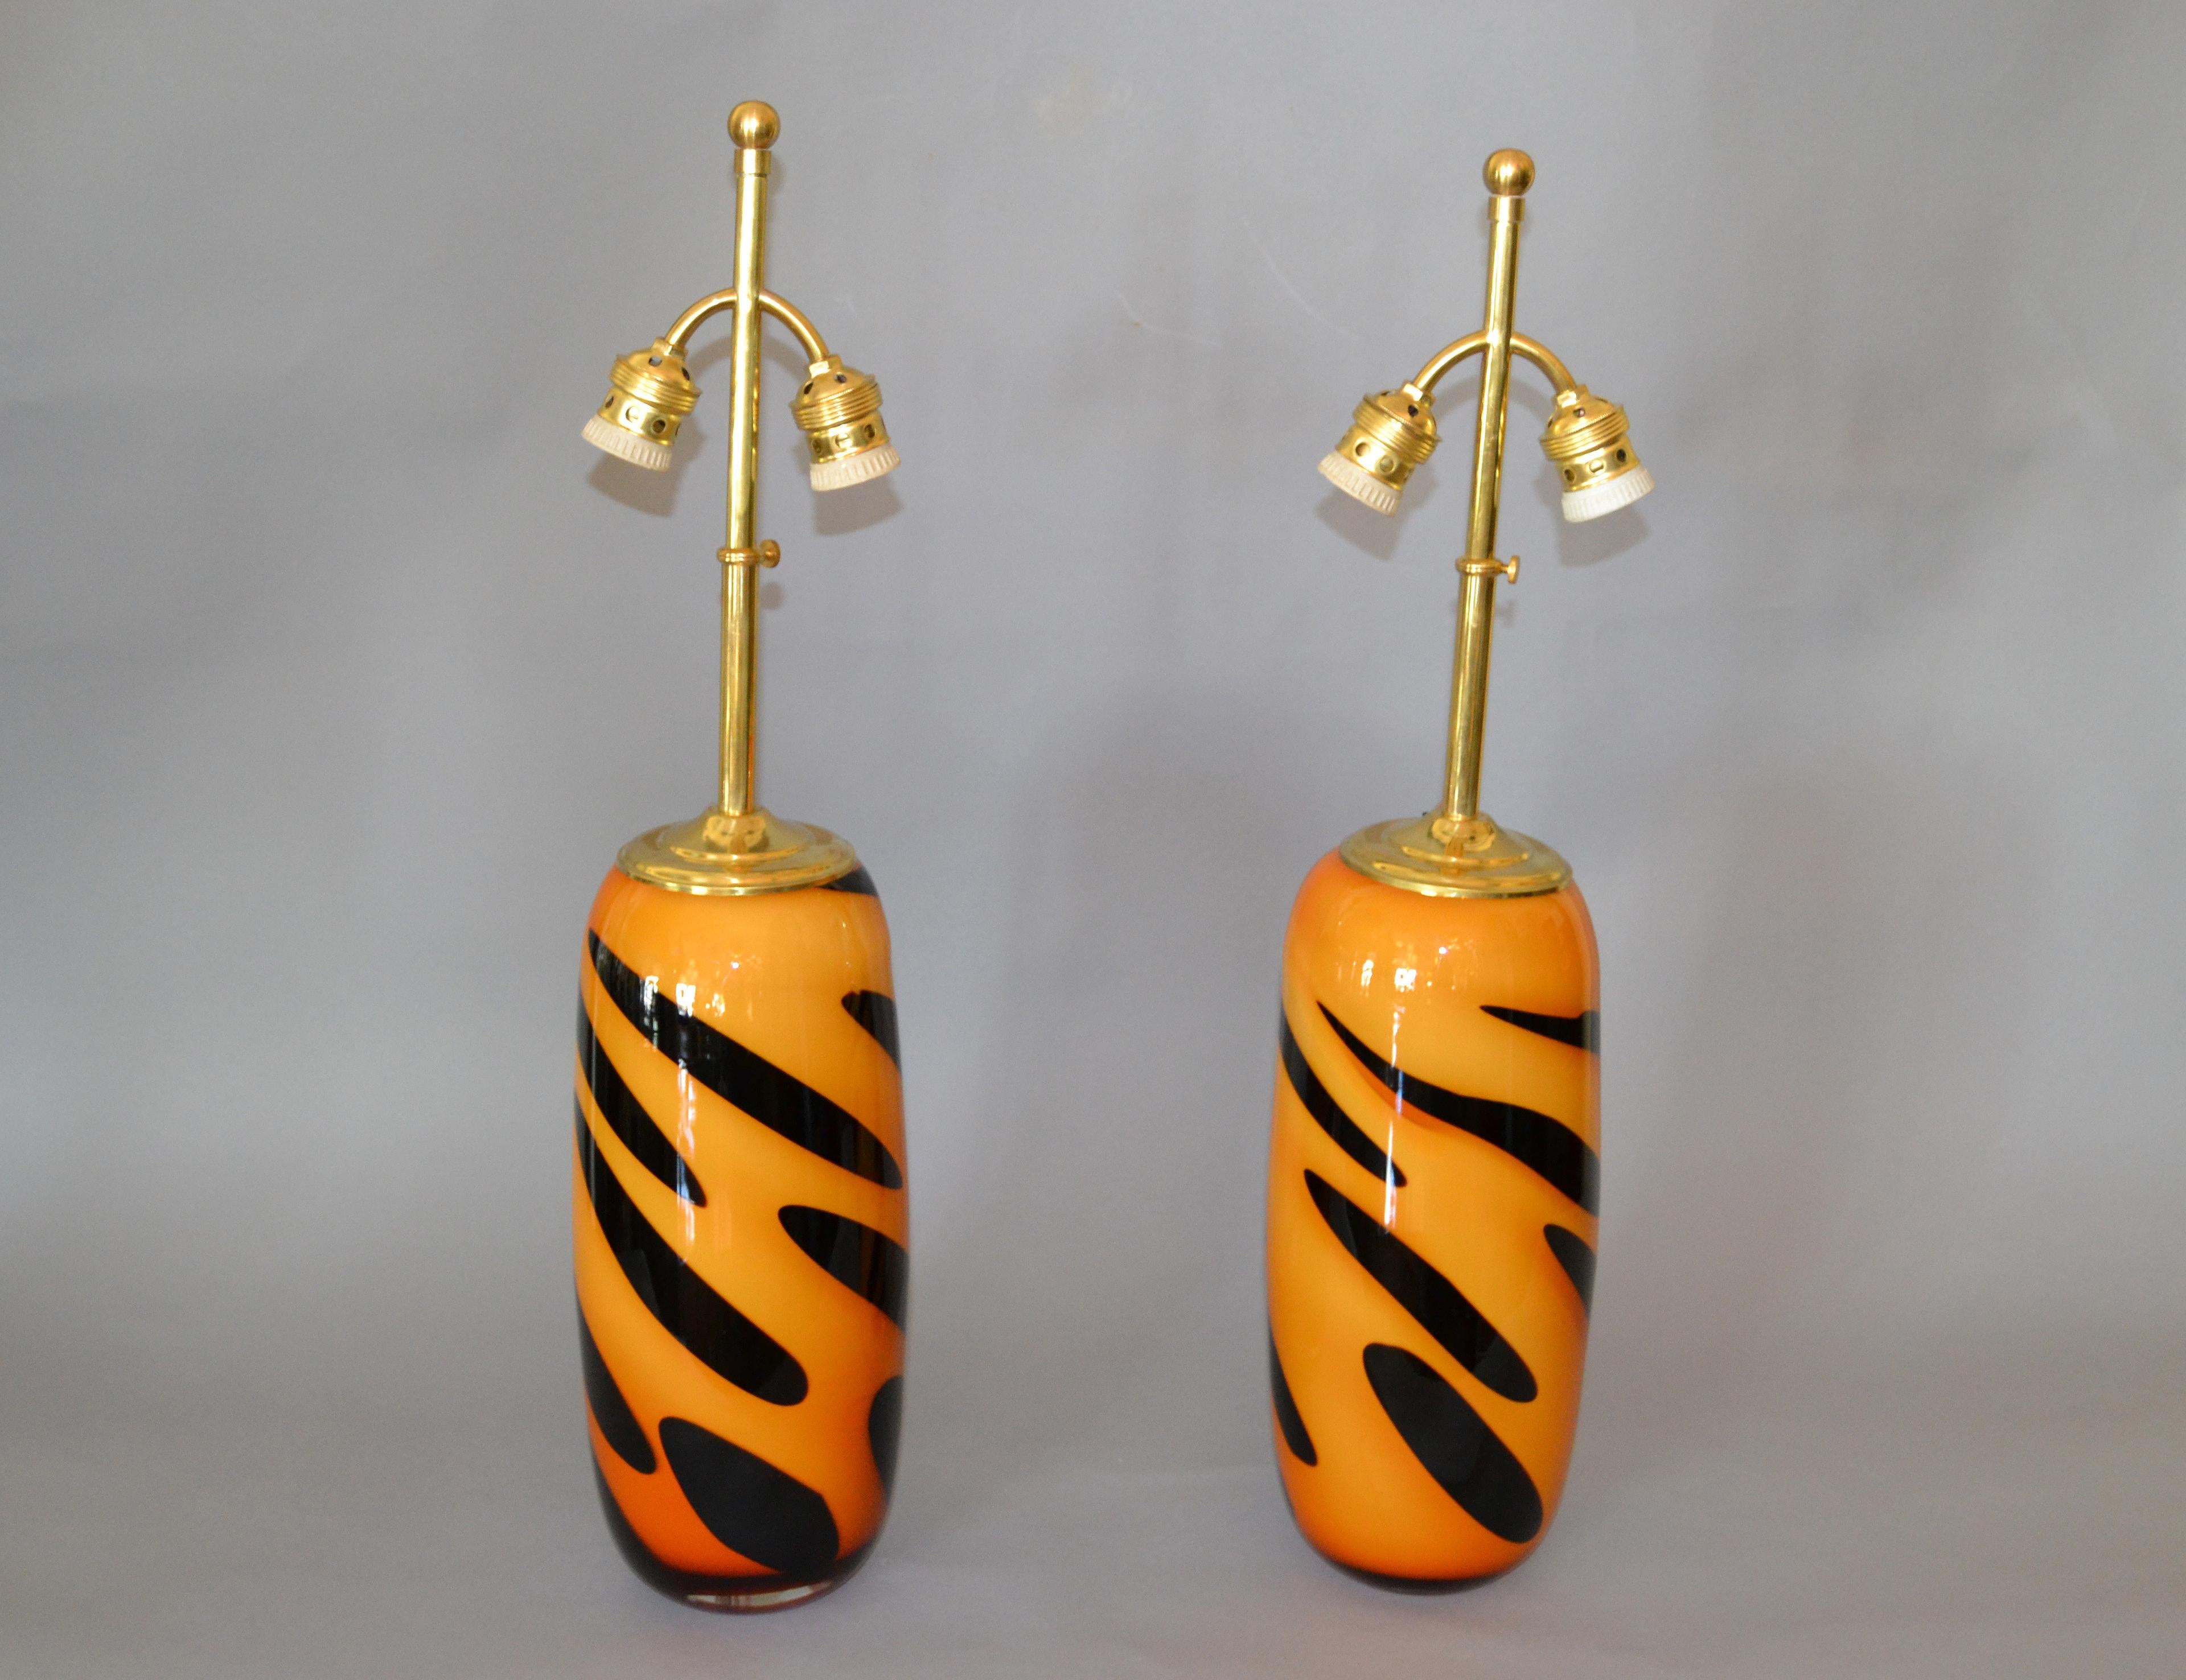 A pair of Mid-Century Modern heavy Murano glass and brass table lamps with tiger stripe motif.
Deep orange and black in Murano glass.
In perfect working condition and each lamp uses 2 max. 40 watts light bulbs.
The height of the lamp shade is